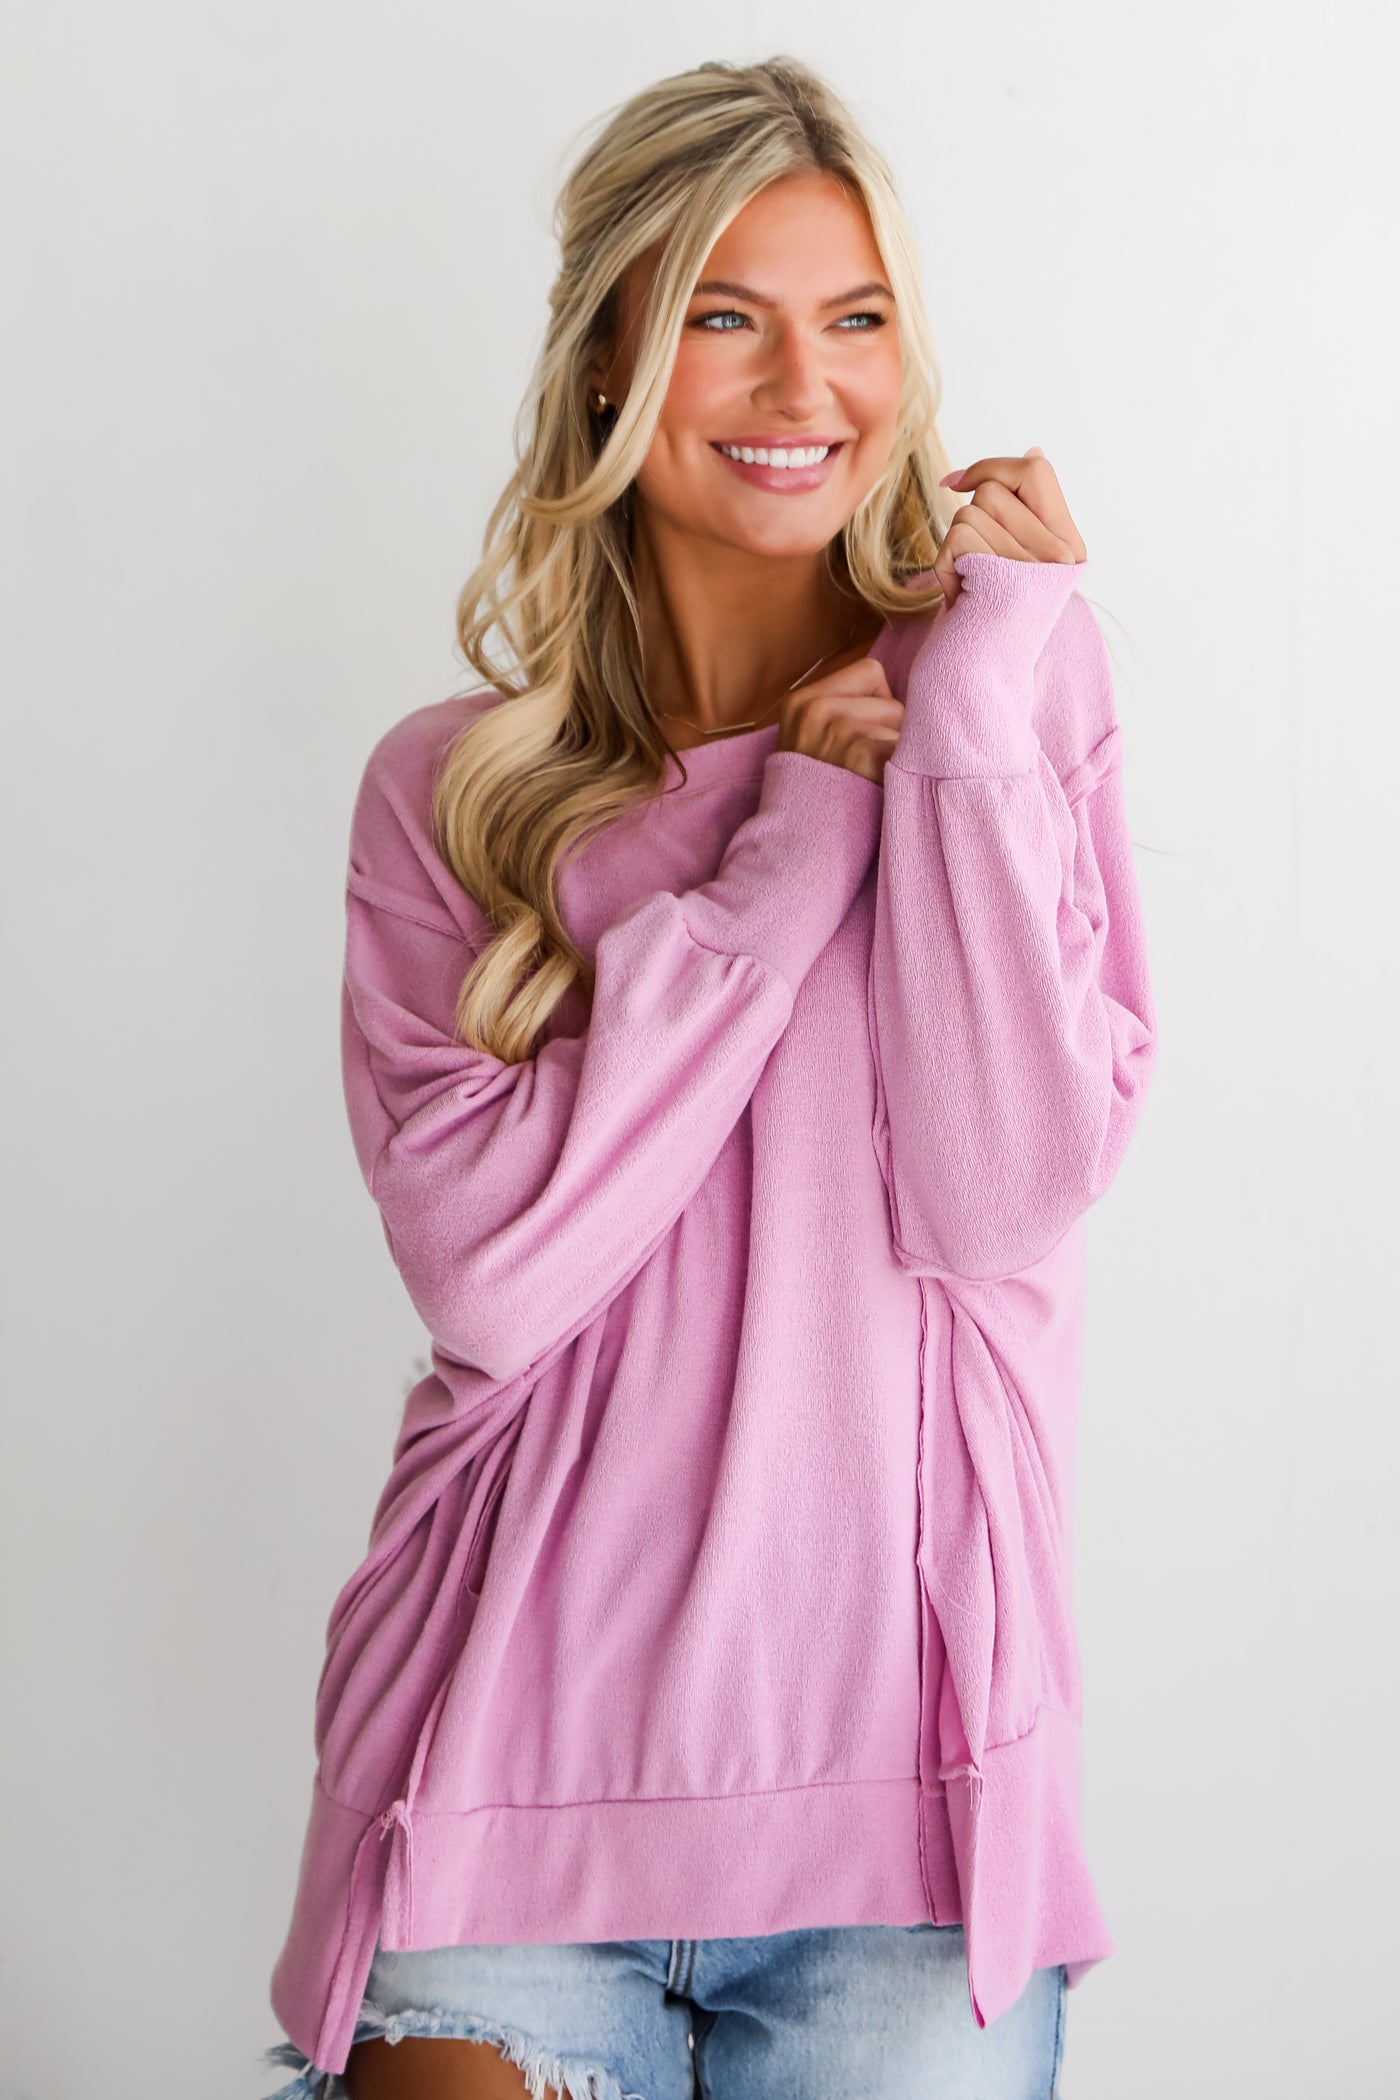 pink oversized top